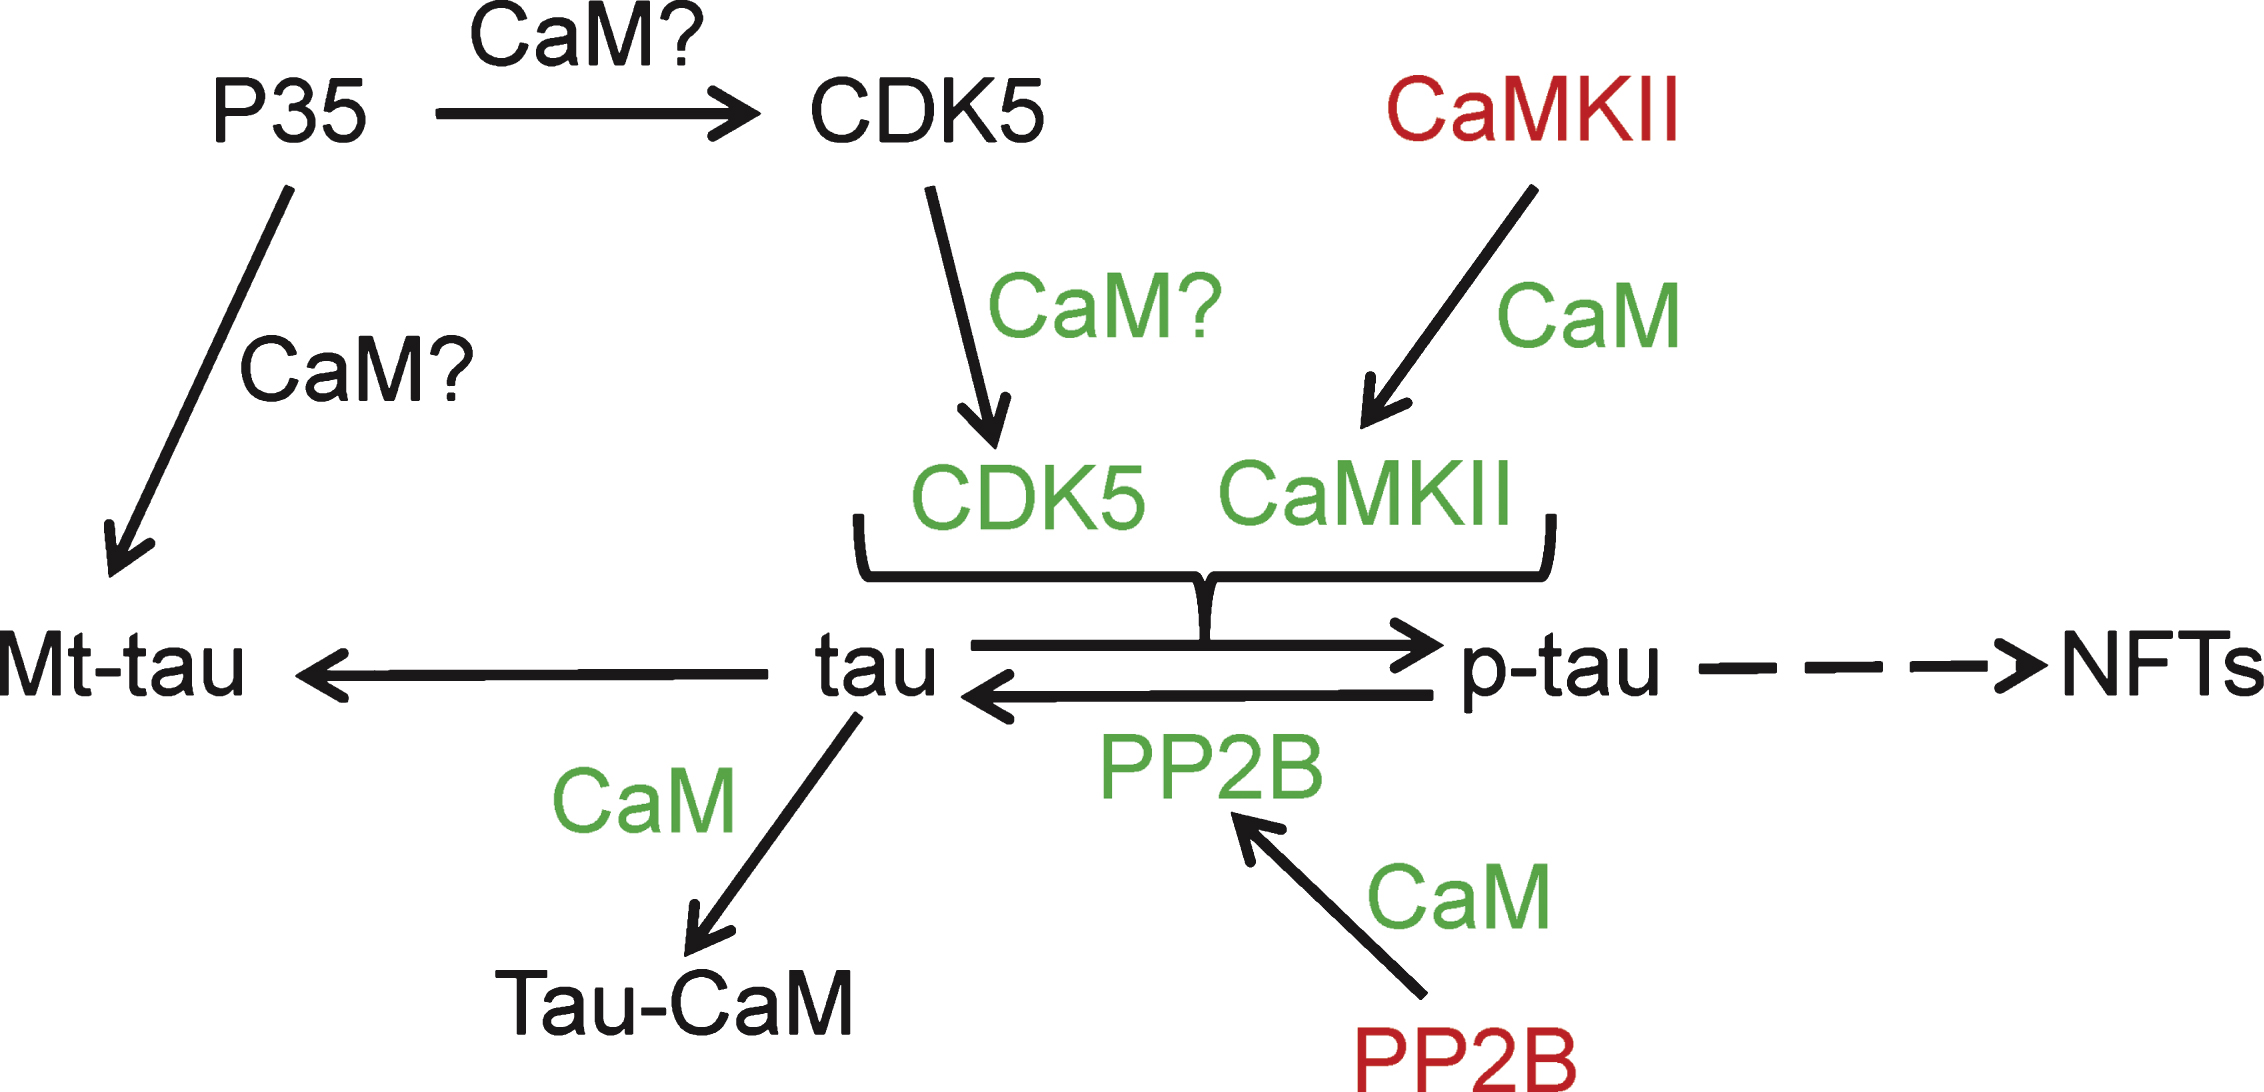 Calmodulin binding proteins linked to tau phosphorylation. Calmodulin-dependent kinase II (CaMKII); cyclin-dependent kinase 5 (CDK5); calmodulin (CaM); neurofibrillary tangles (NFTs); CDK5 activator (P35); protein phosphatase 2B (PP2B); colors: green, stimulated/activated; red, inhibited.